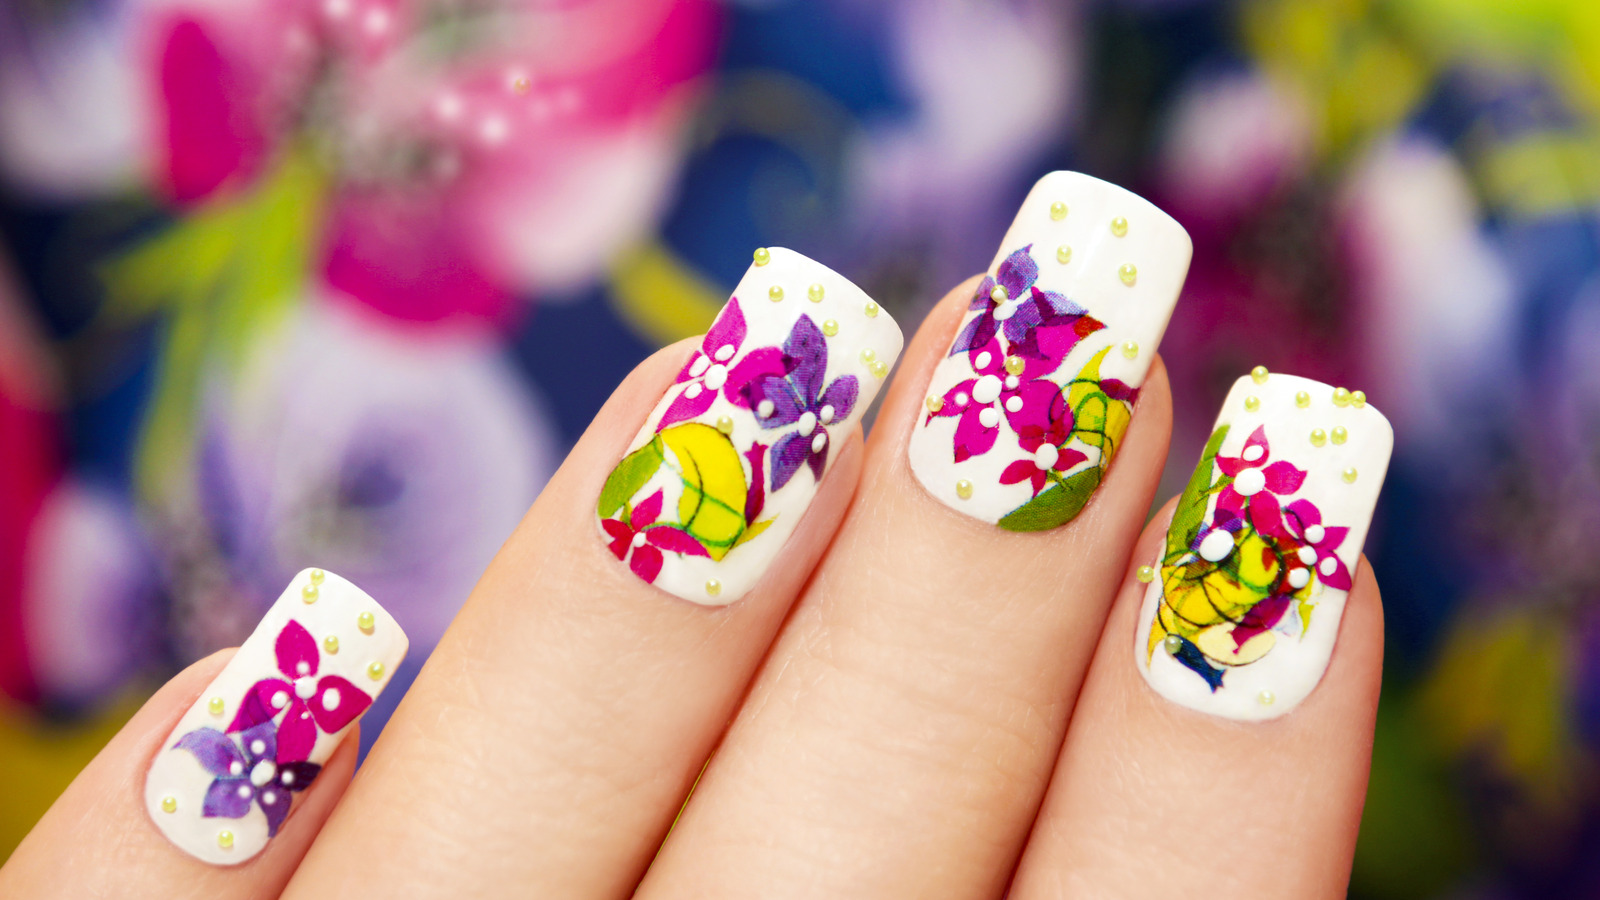 4. Easy Nail Art Hacks for a Professional Look - wide 4